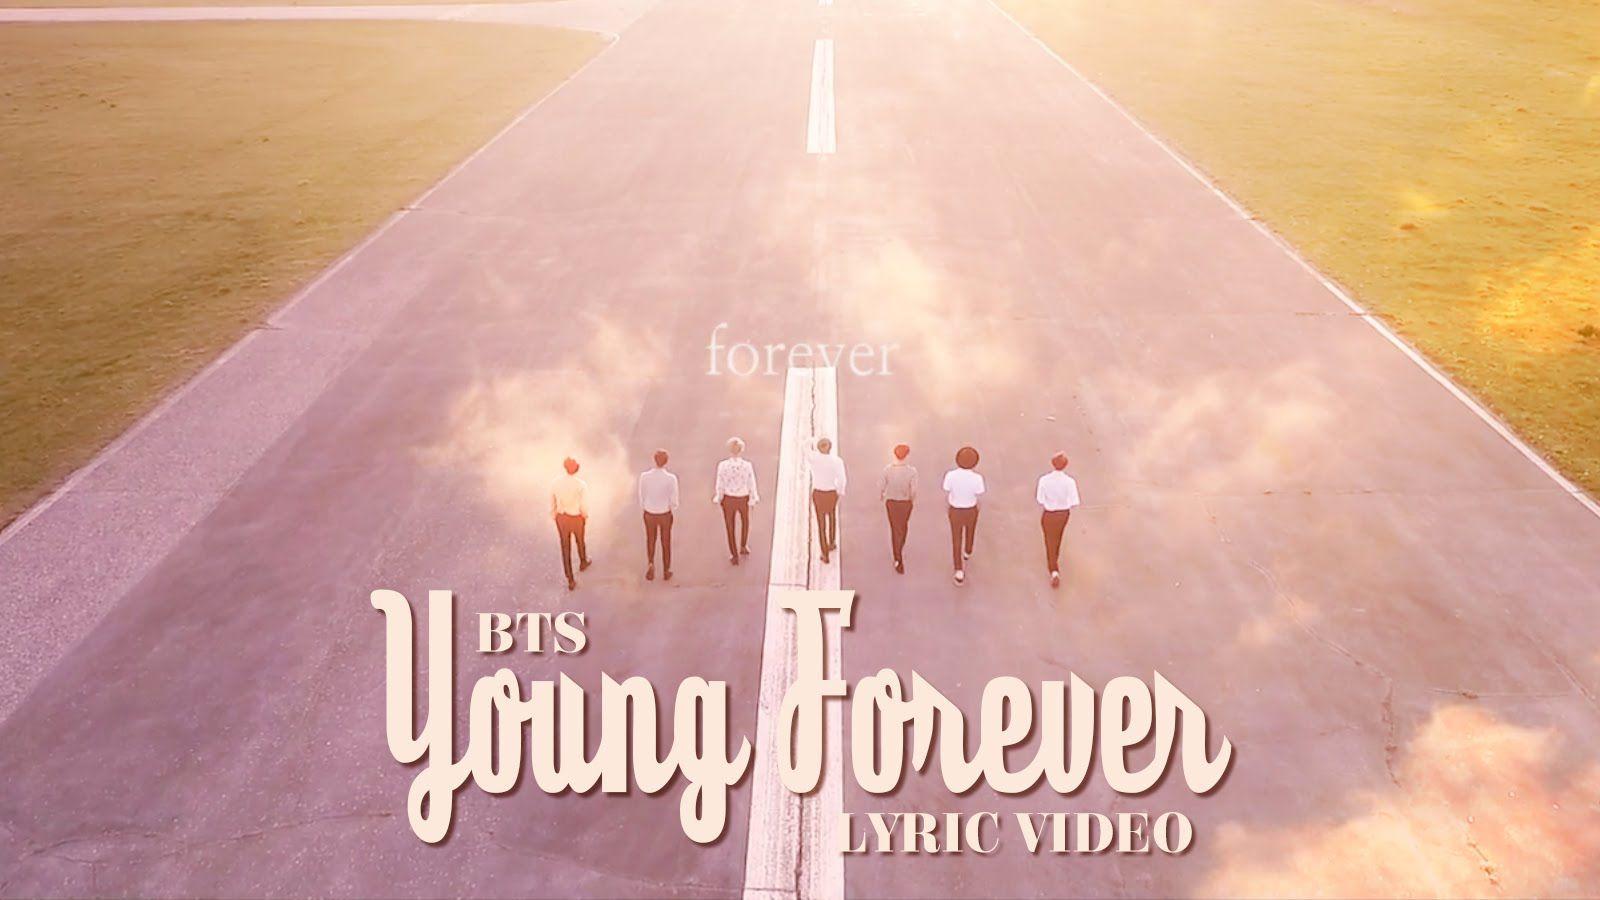 BTS Young Forever Wallpapers - Top Free BTS Young Forever Backgrounds ...